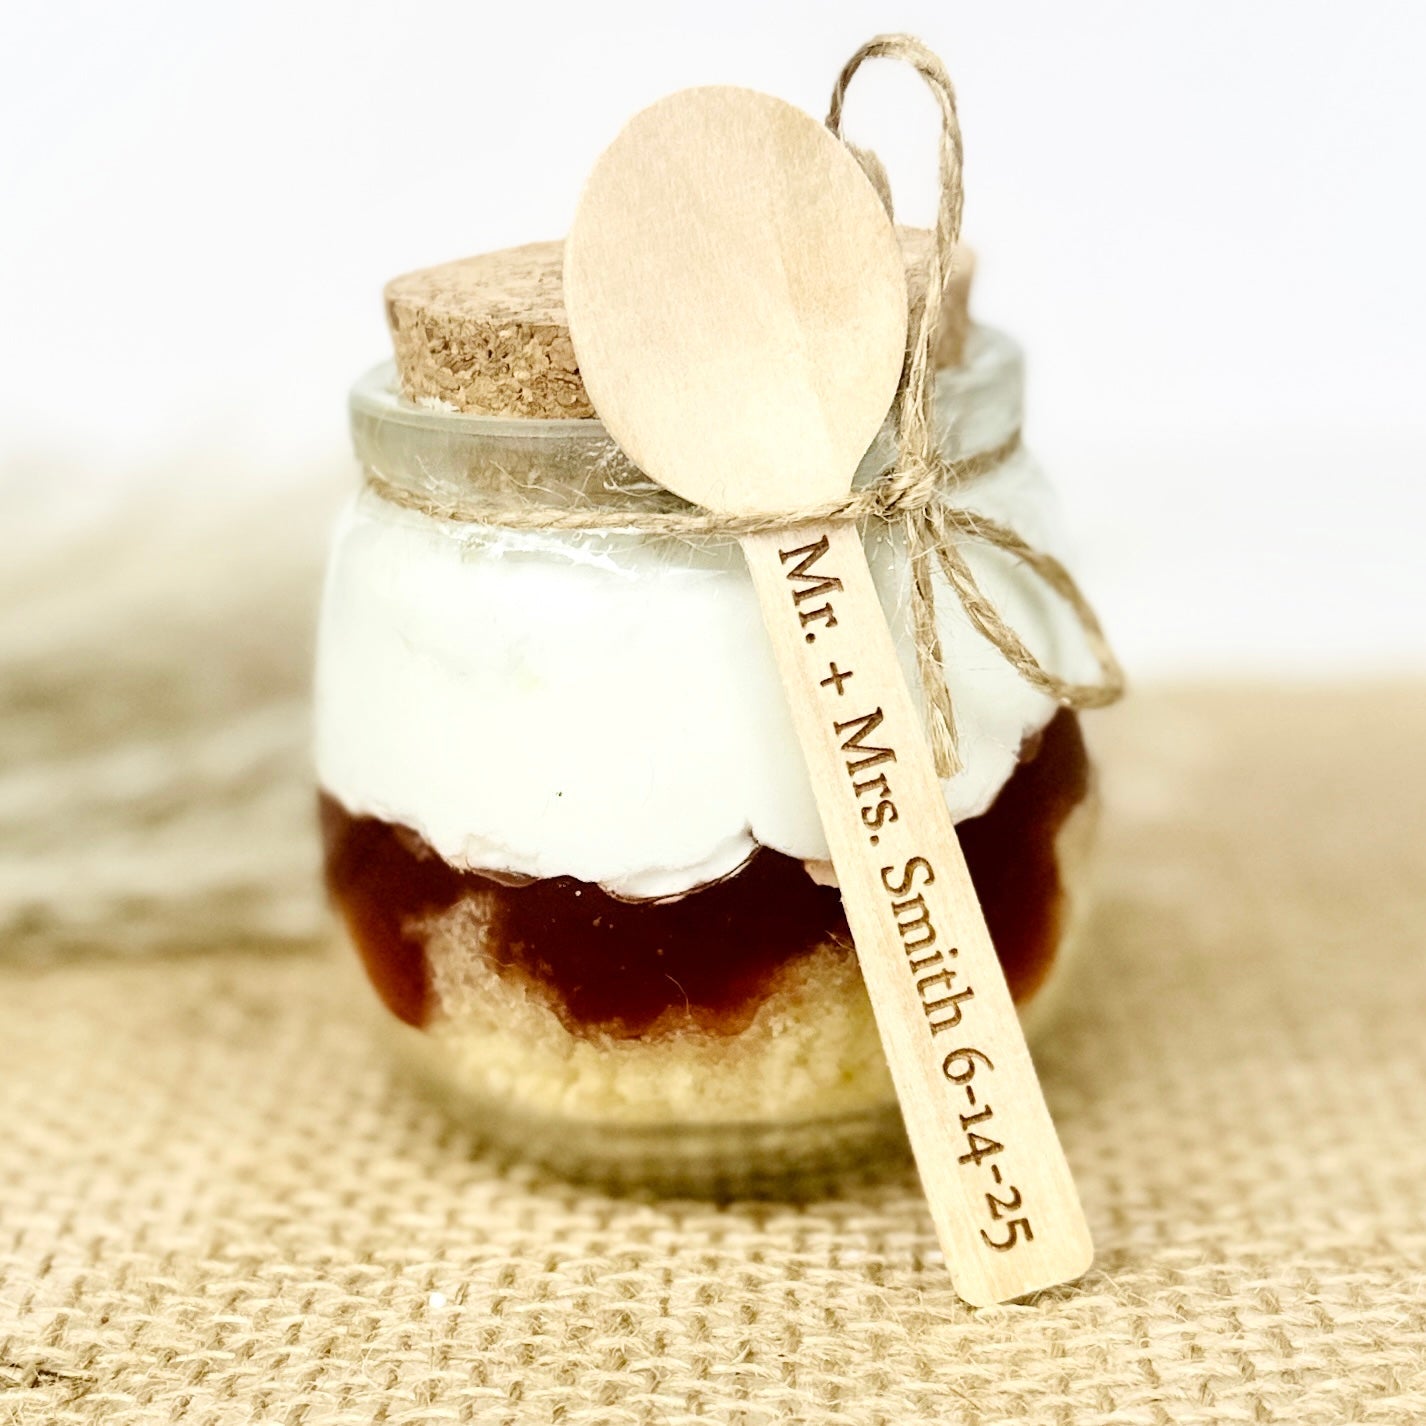 Wedding Favors, Corporate Event Gifts, Old Fashioned Drinking Jars